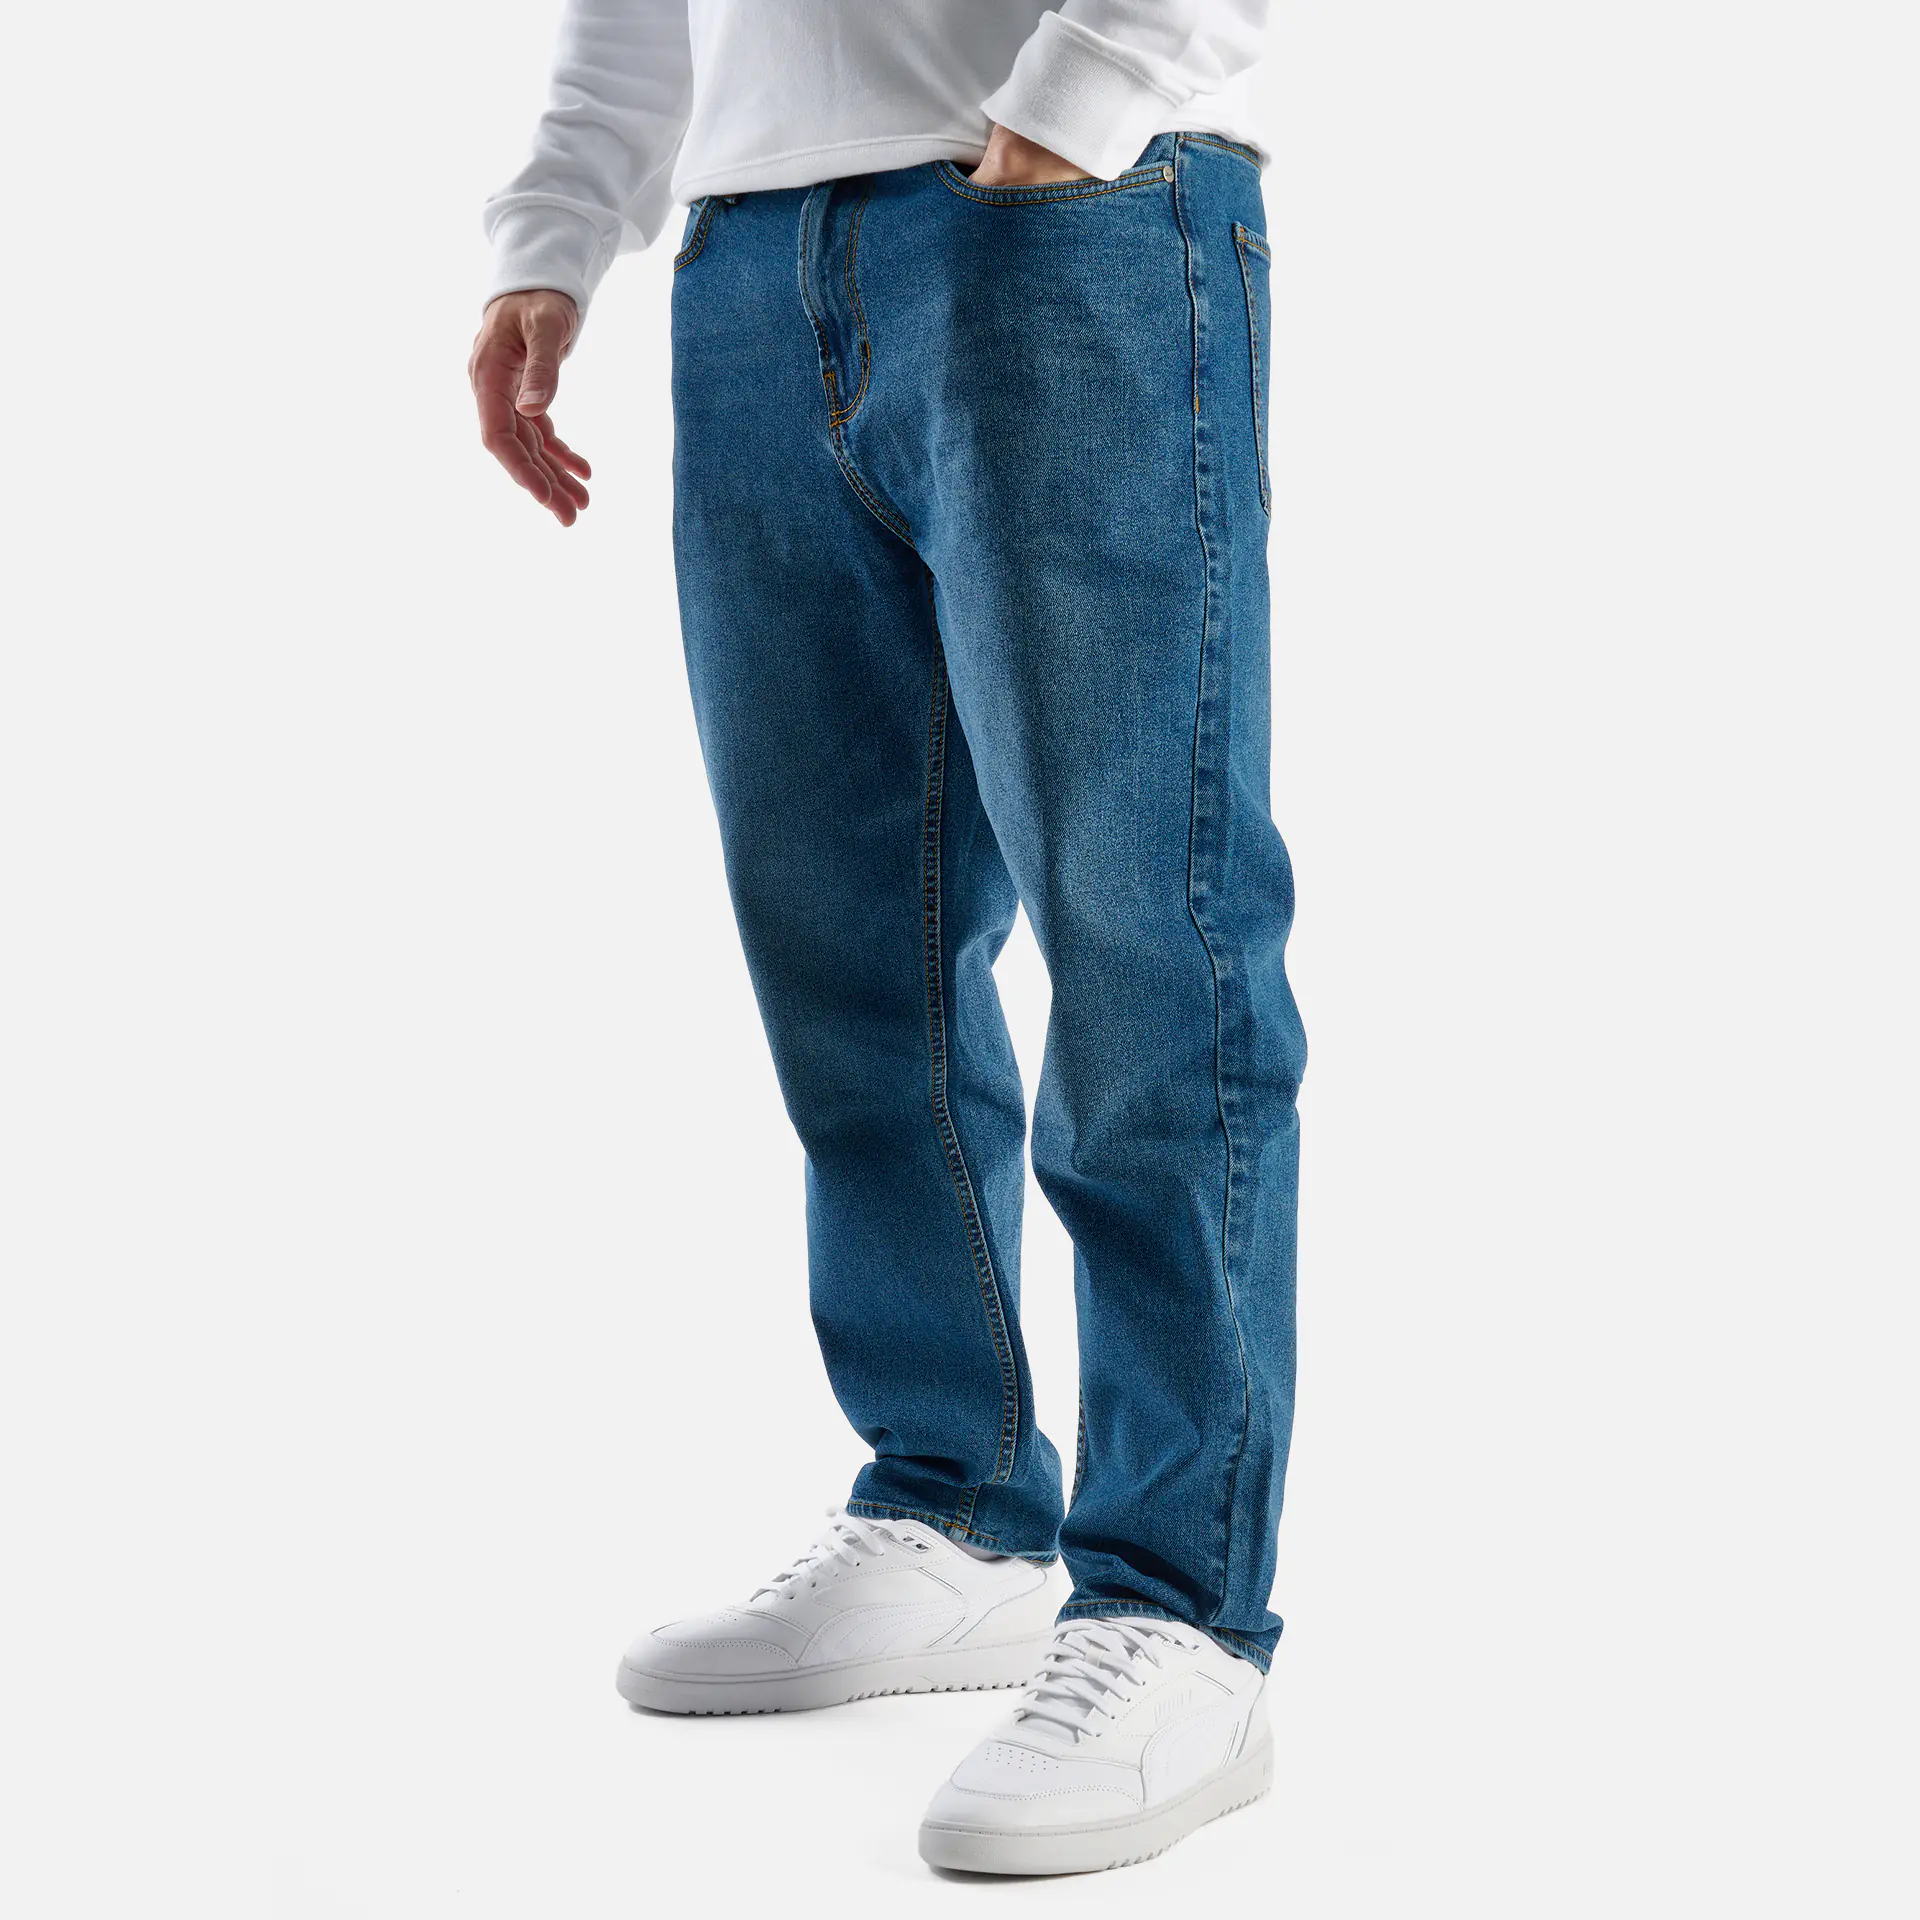 Reell Jeans Rave Tapered Fit Jeans Retro Mid Blue